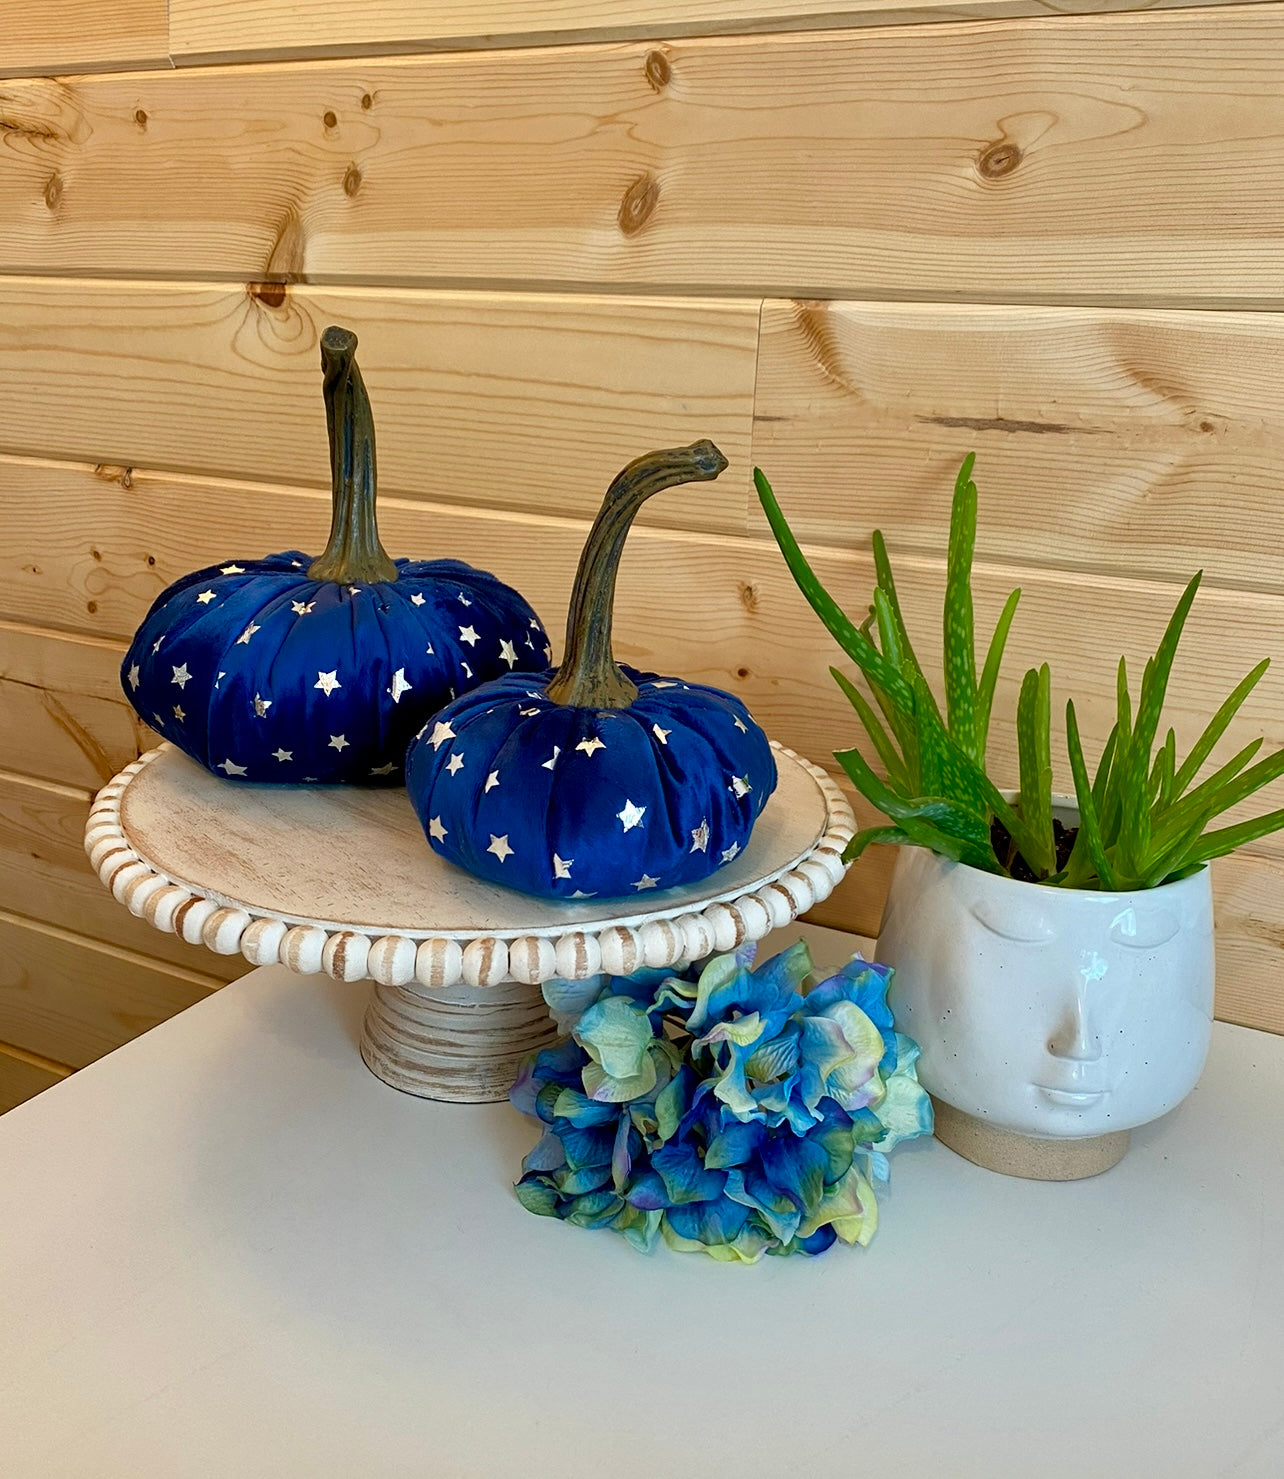 Handmade Pumpkin Set of 3 Navy Mink and Silver Foil Stars Gift Set for Host Patriotic Home Decor Americana Centerpiece Summer Party July 4th